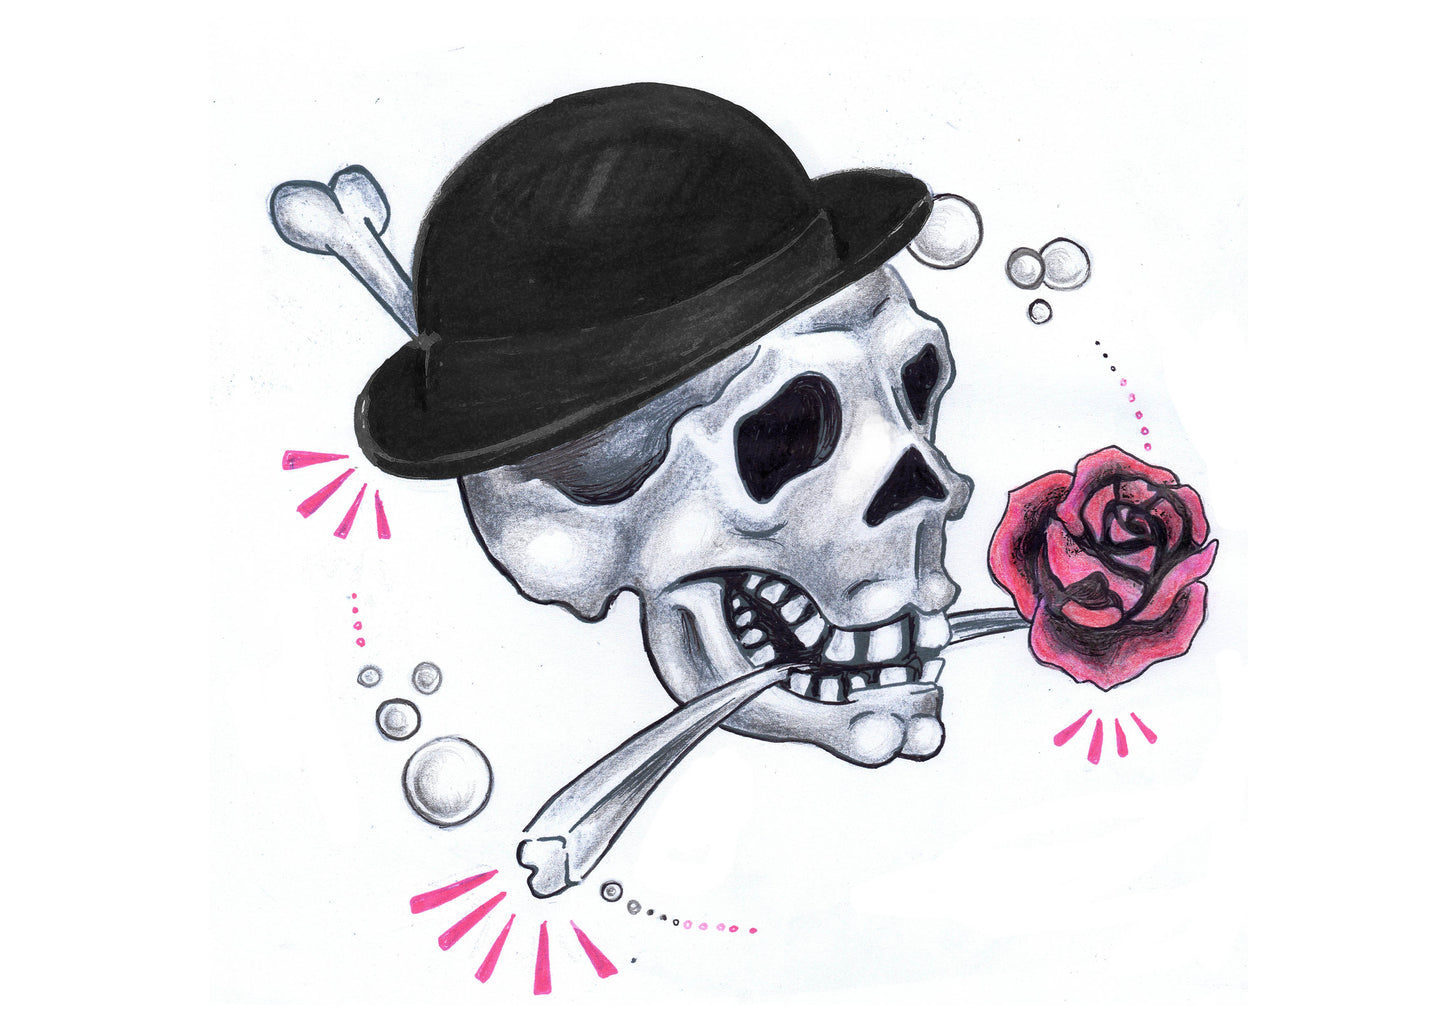 Bowler_skull_with_colour_2